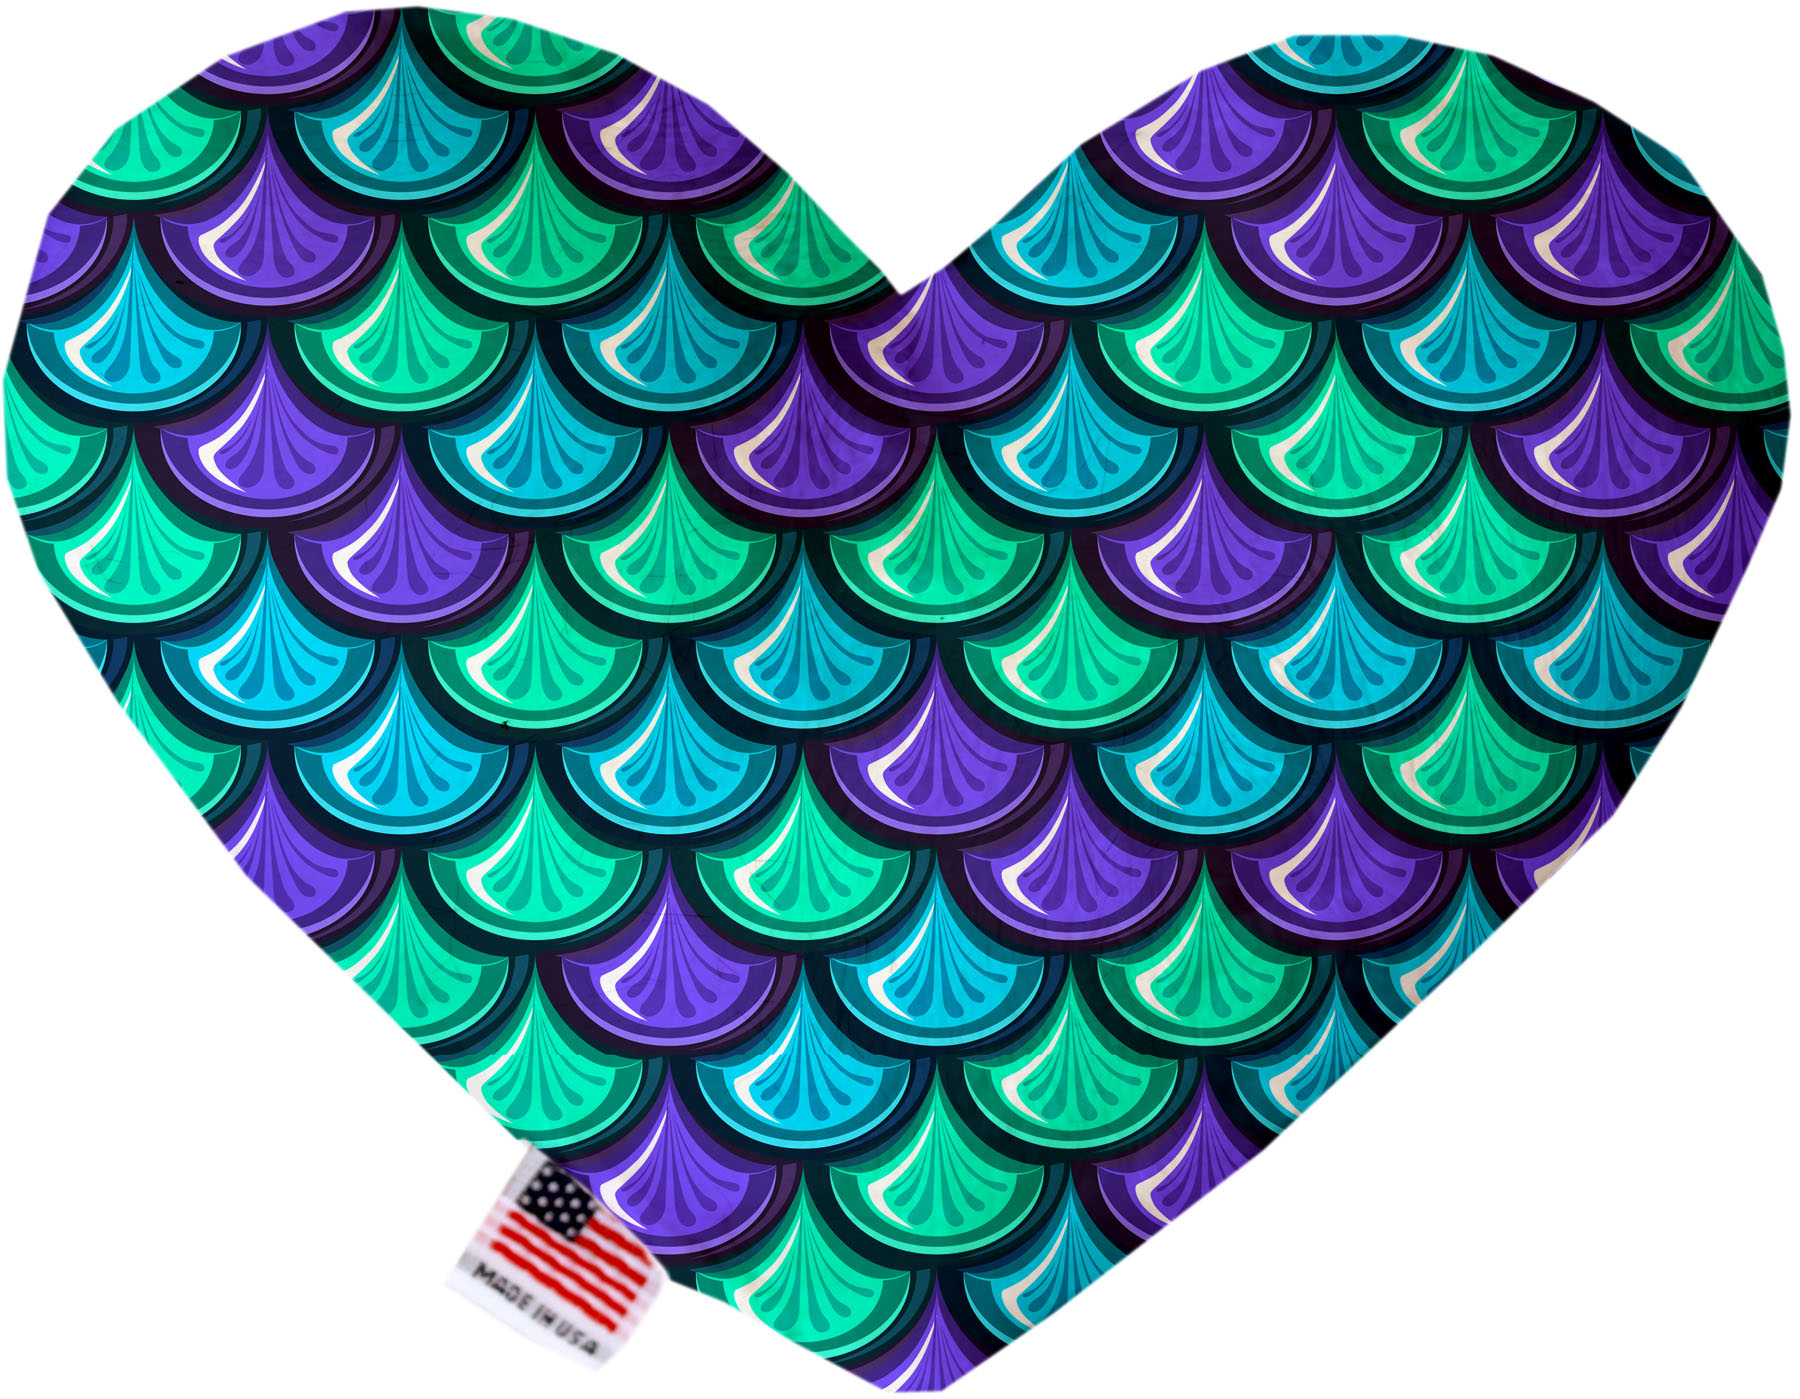 Mermaid Scales 6 inch Canvas Heart Dog Toy